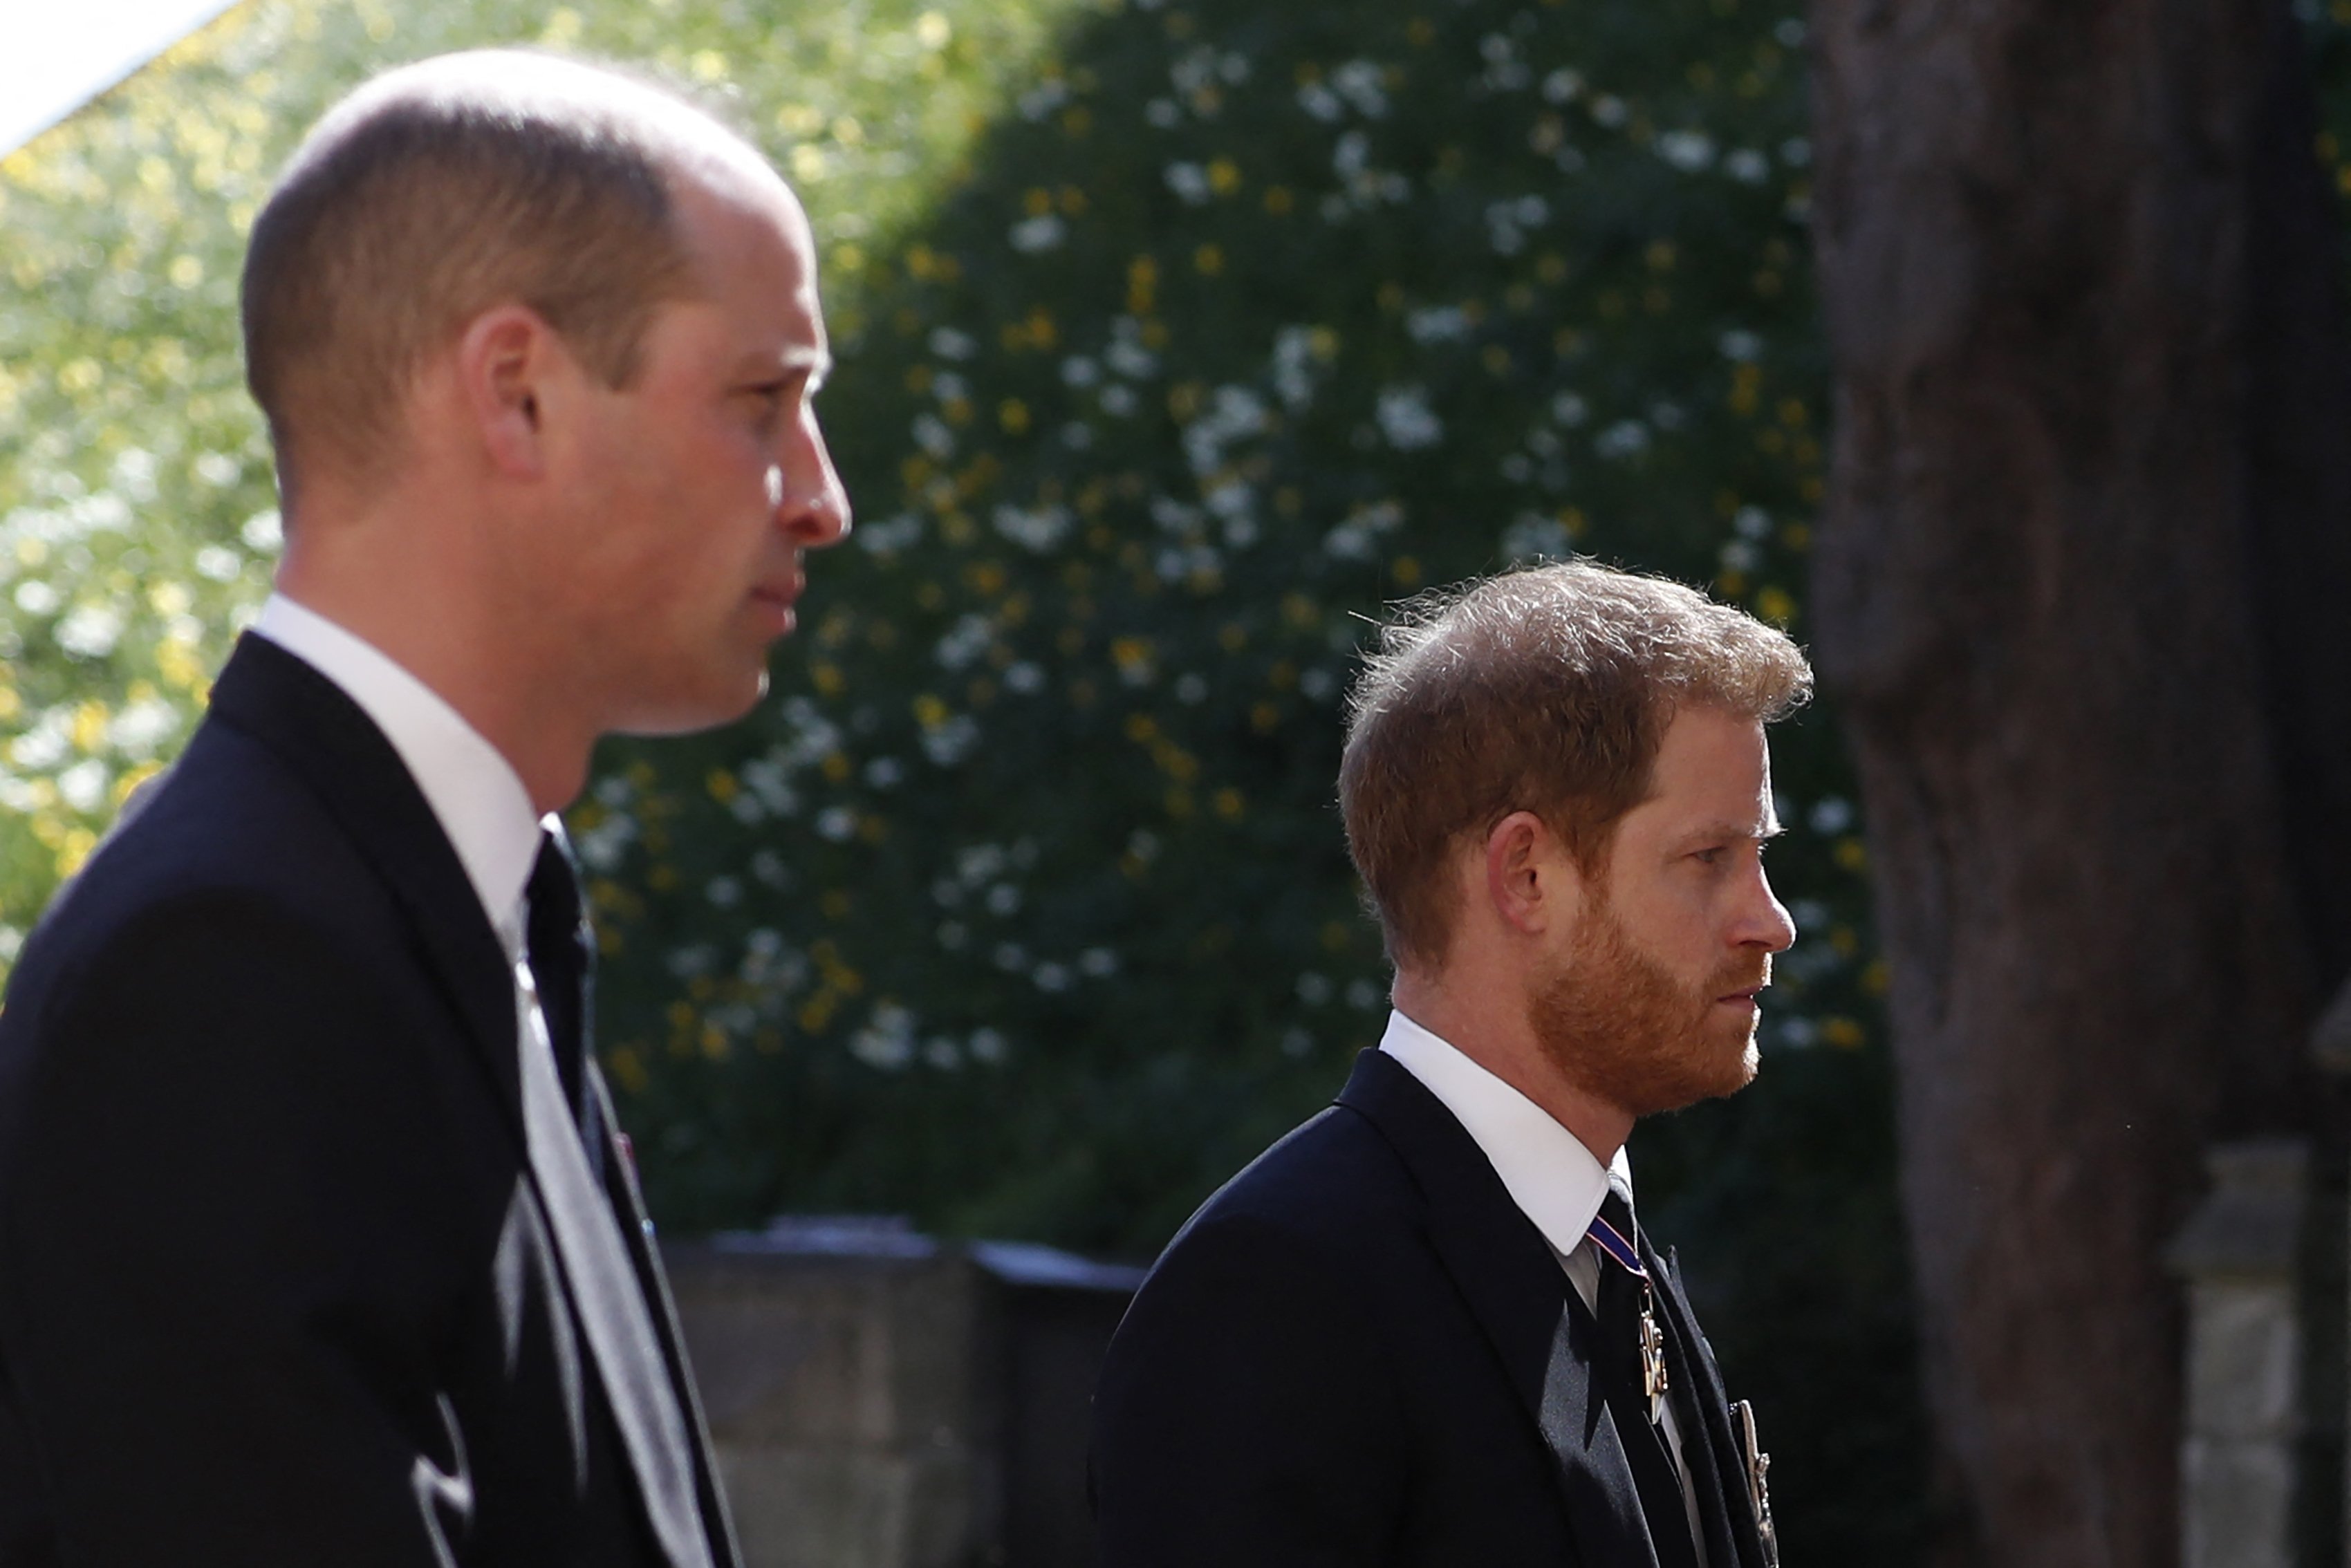 Prince William, Duke of Cambridge and Prince Harry, Duke of Sussex during the ceremonial funeral procession of Prince Philip, Duke of Edinburgh to St George's Chapel in Windsor Castle on April 17, 2021 in Windsor, London. / Source: Getty Images